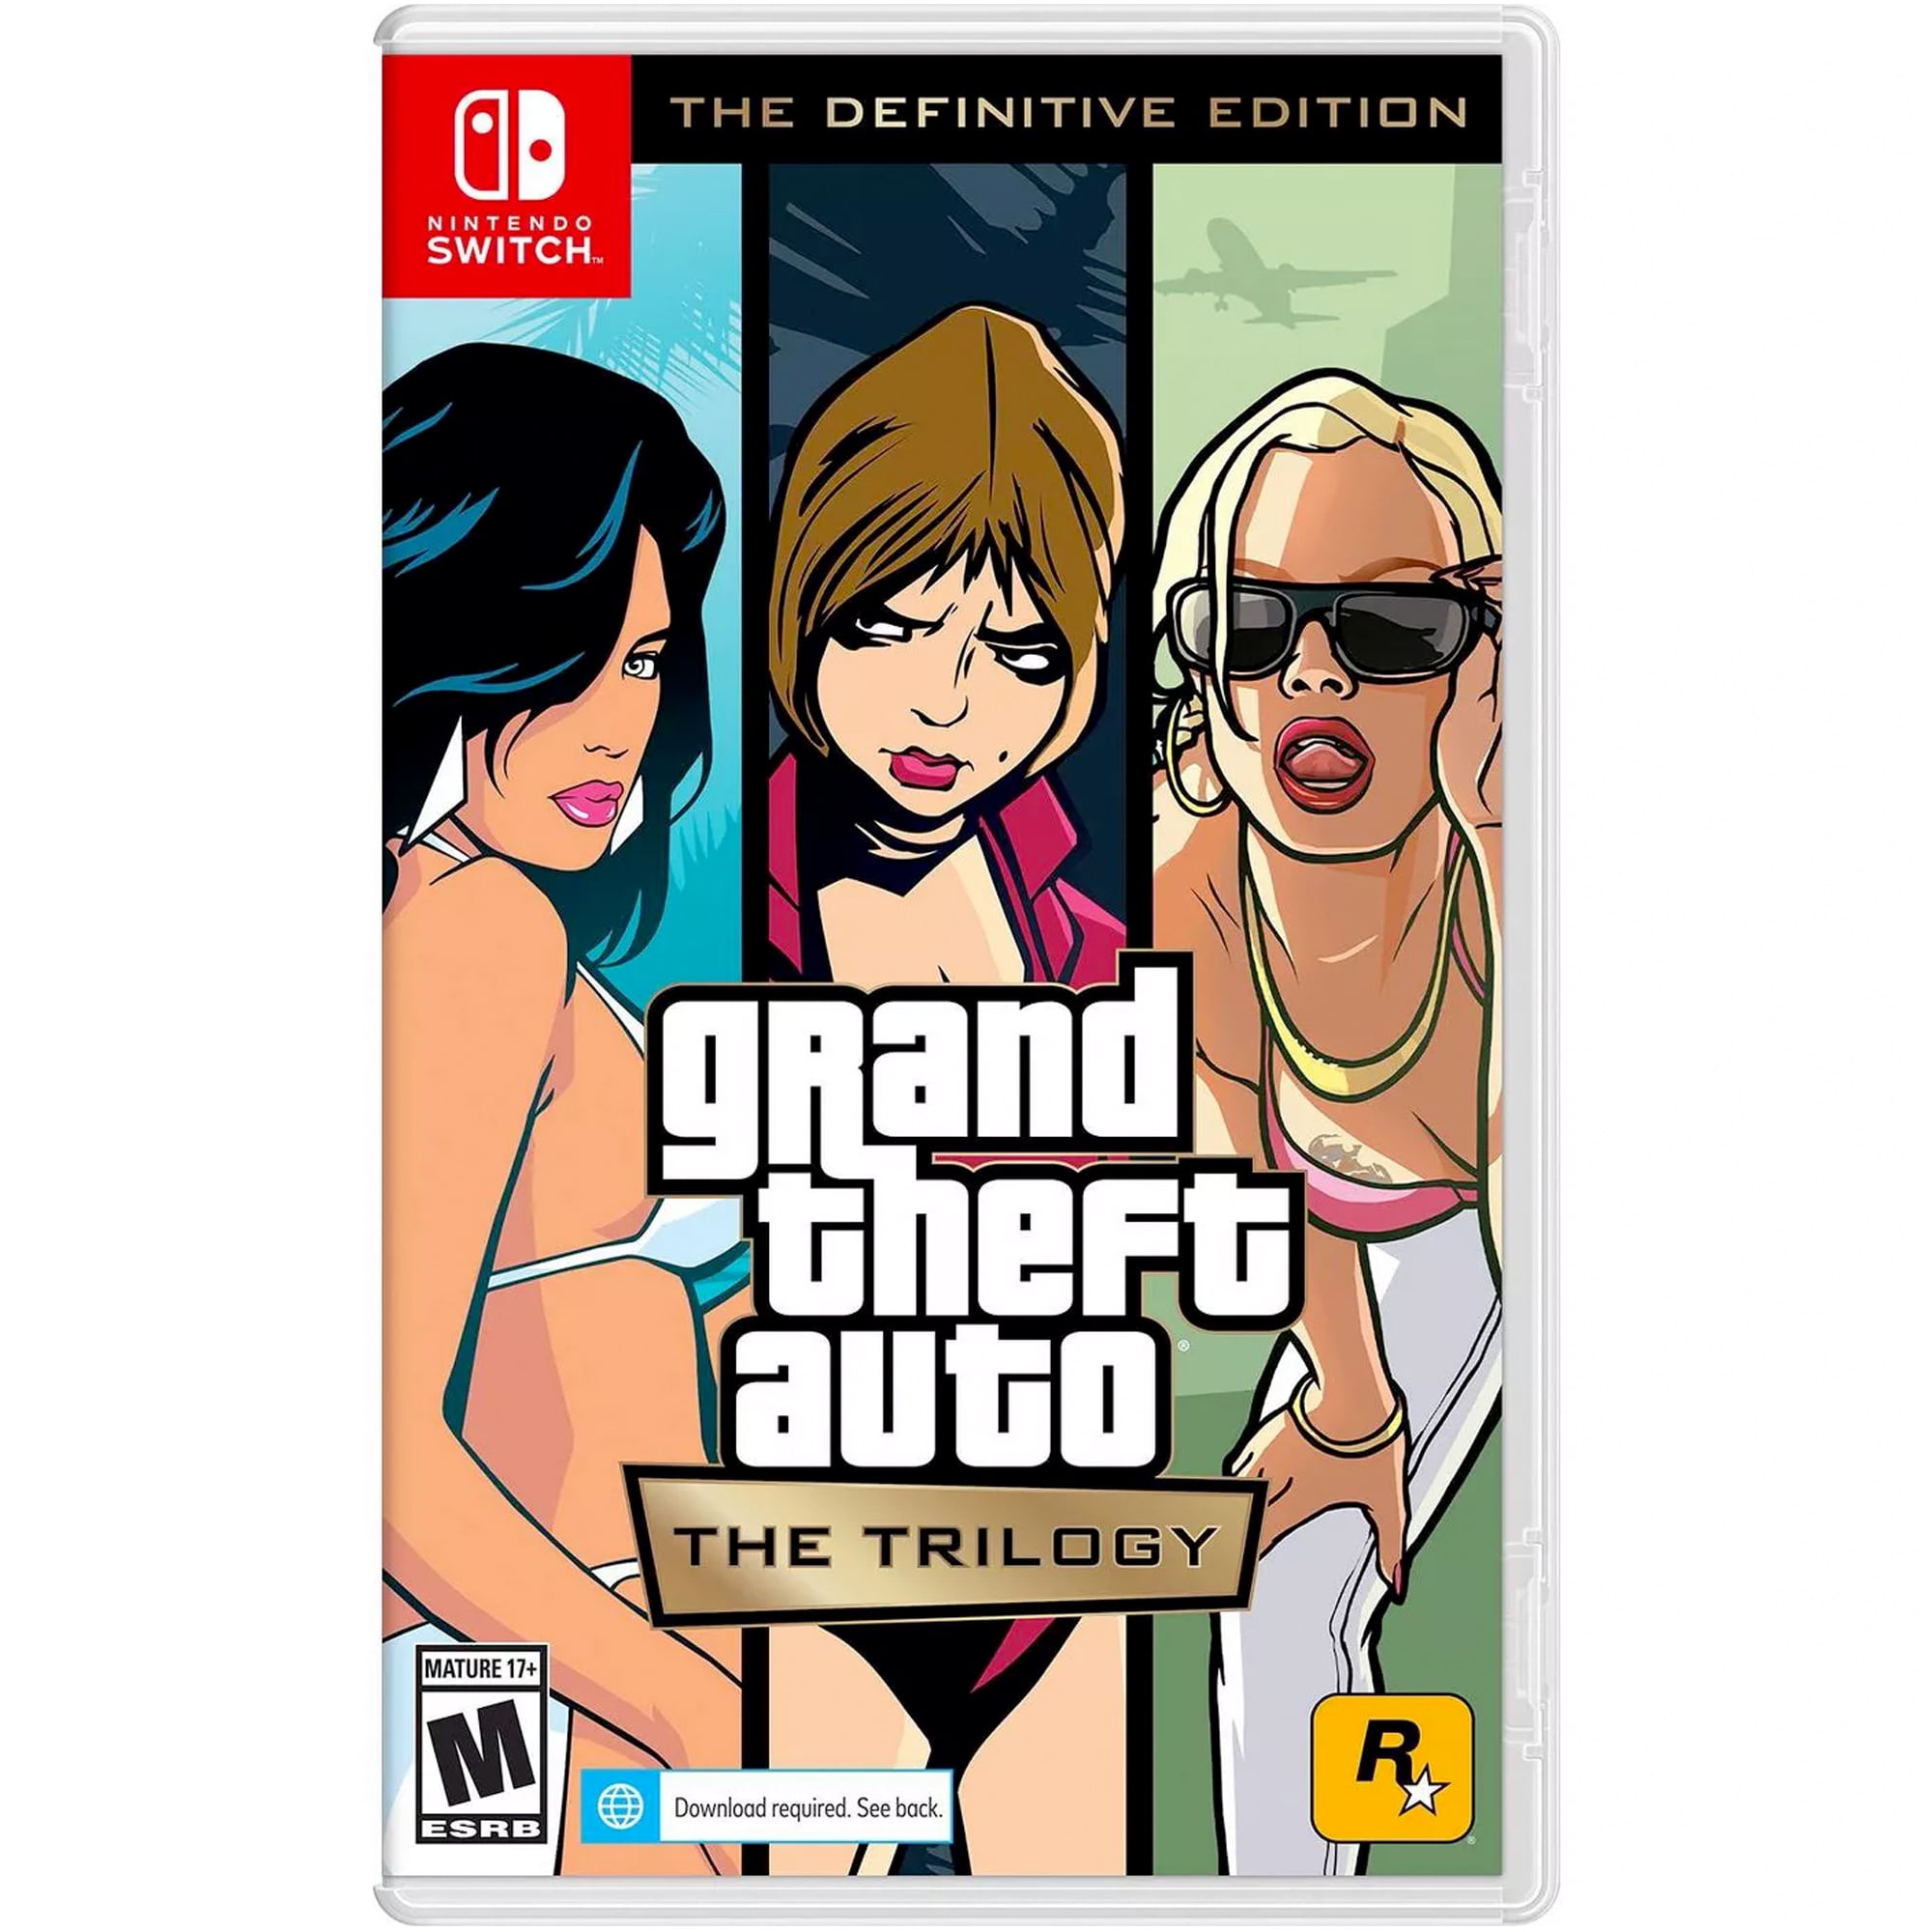 Grand Theft Auto: The Trilogy - The Definitive Edition - Rockstar Games